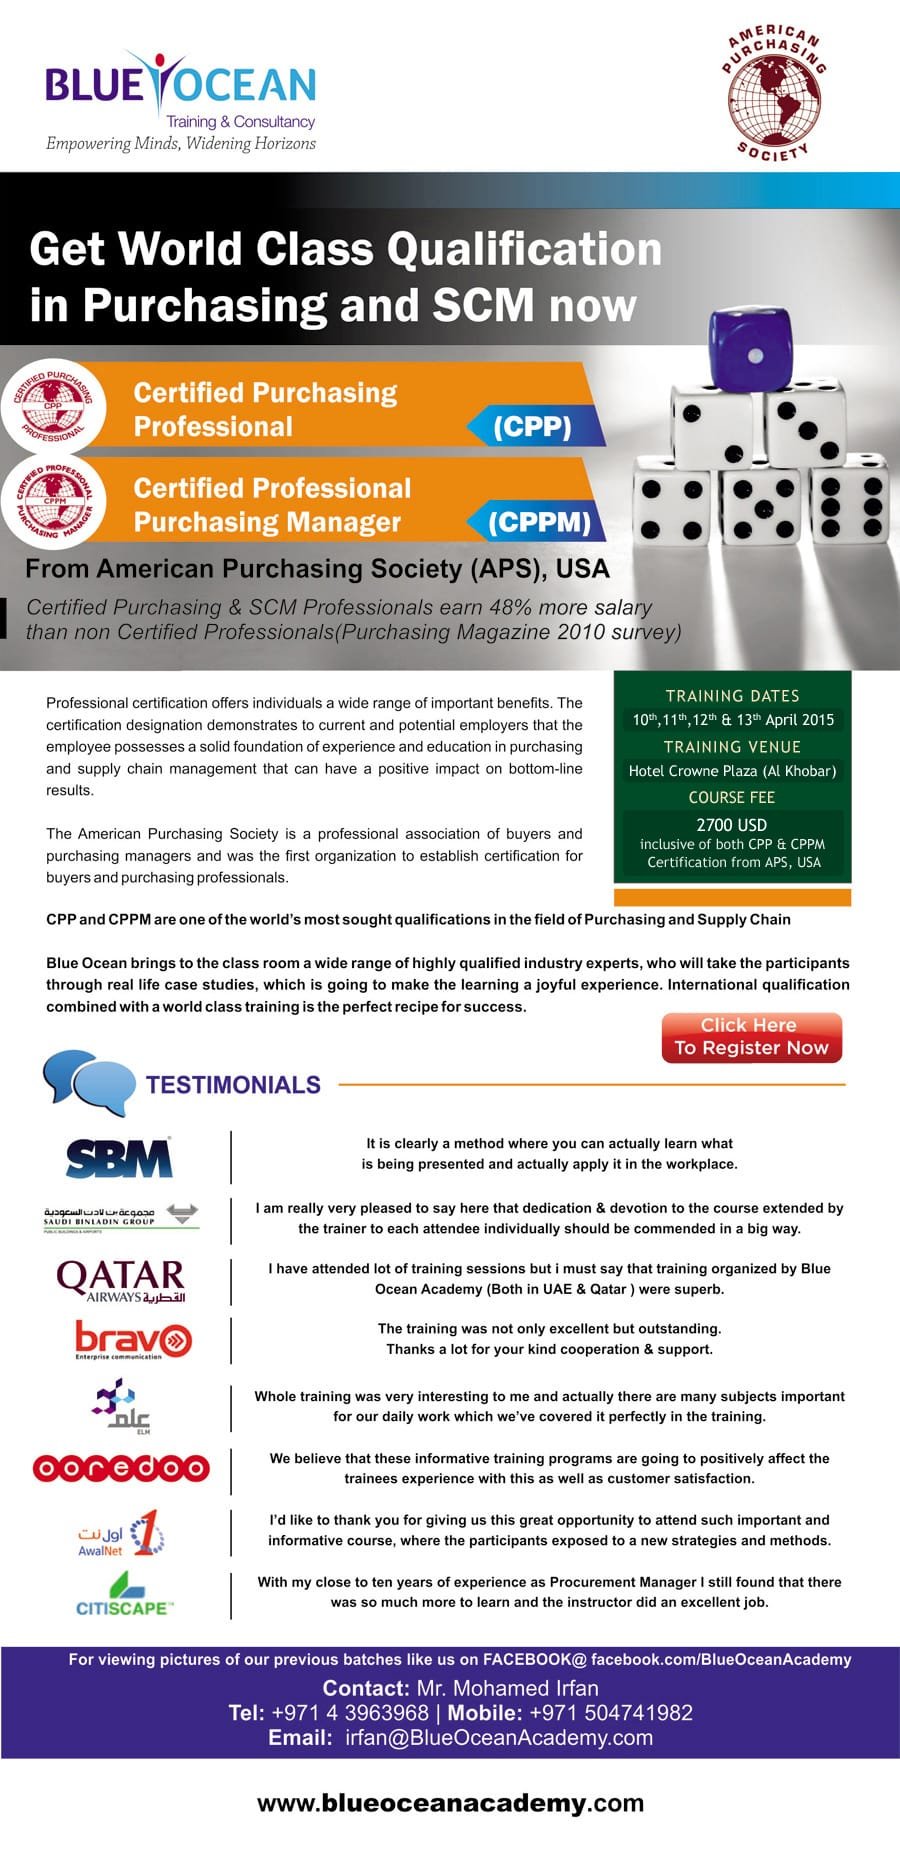 Get World Class Qualification in Purchasing and SCM Now